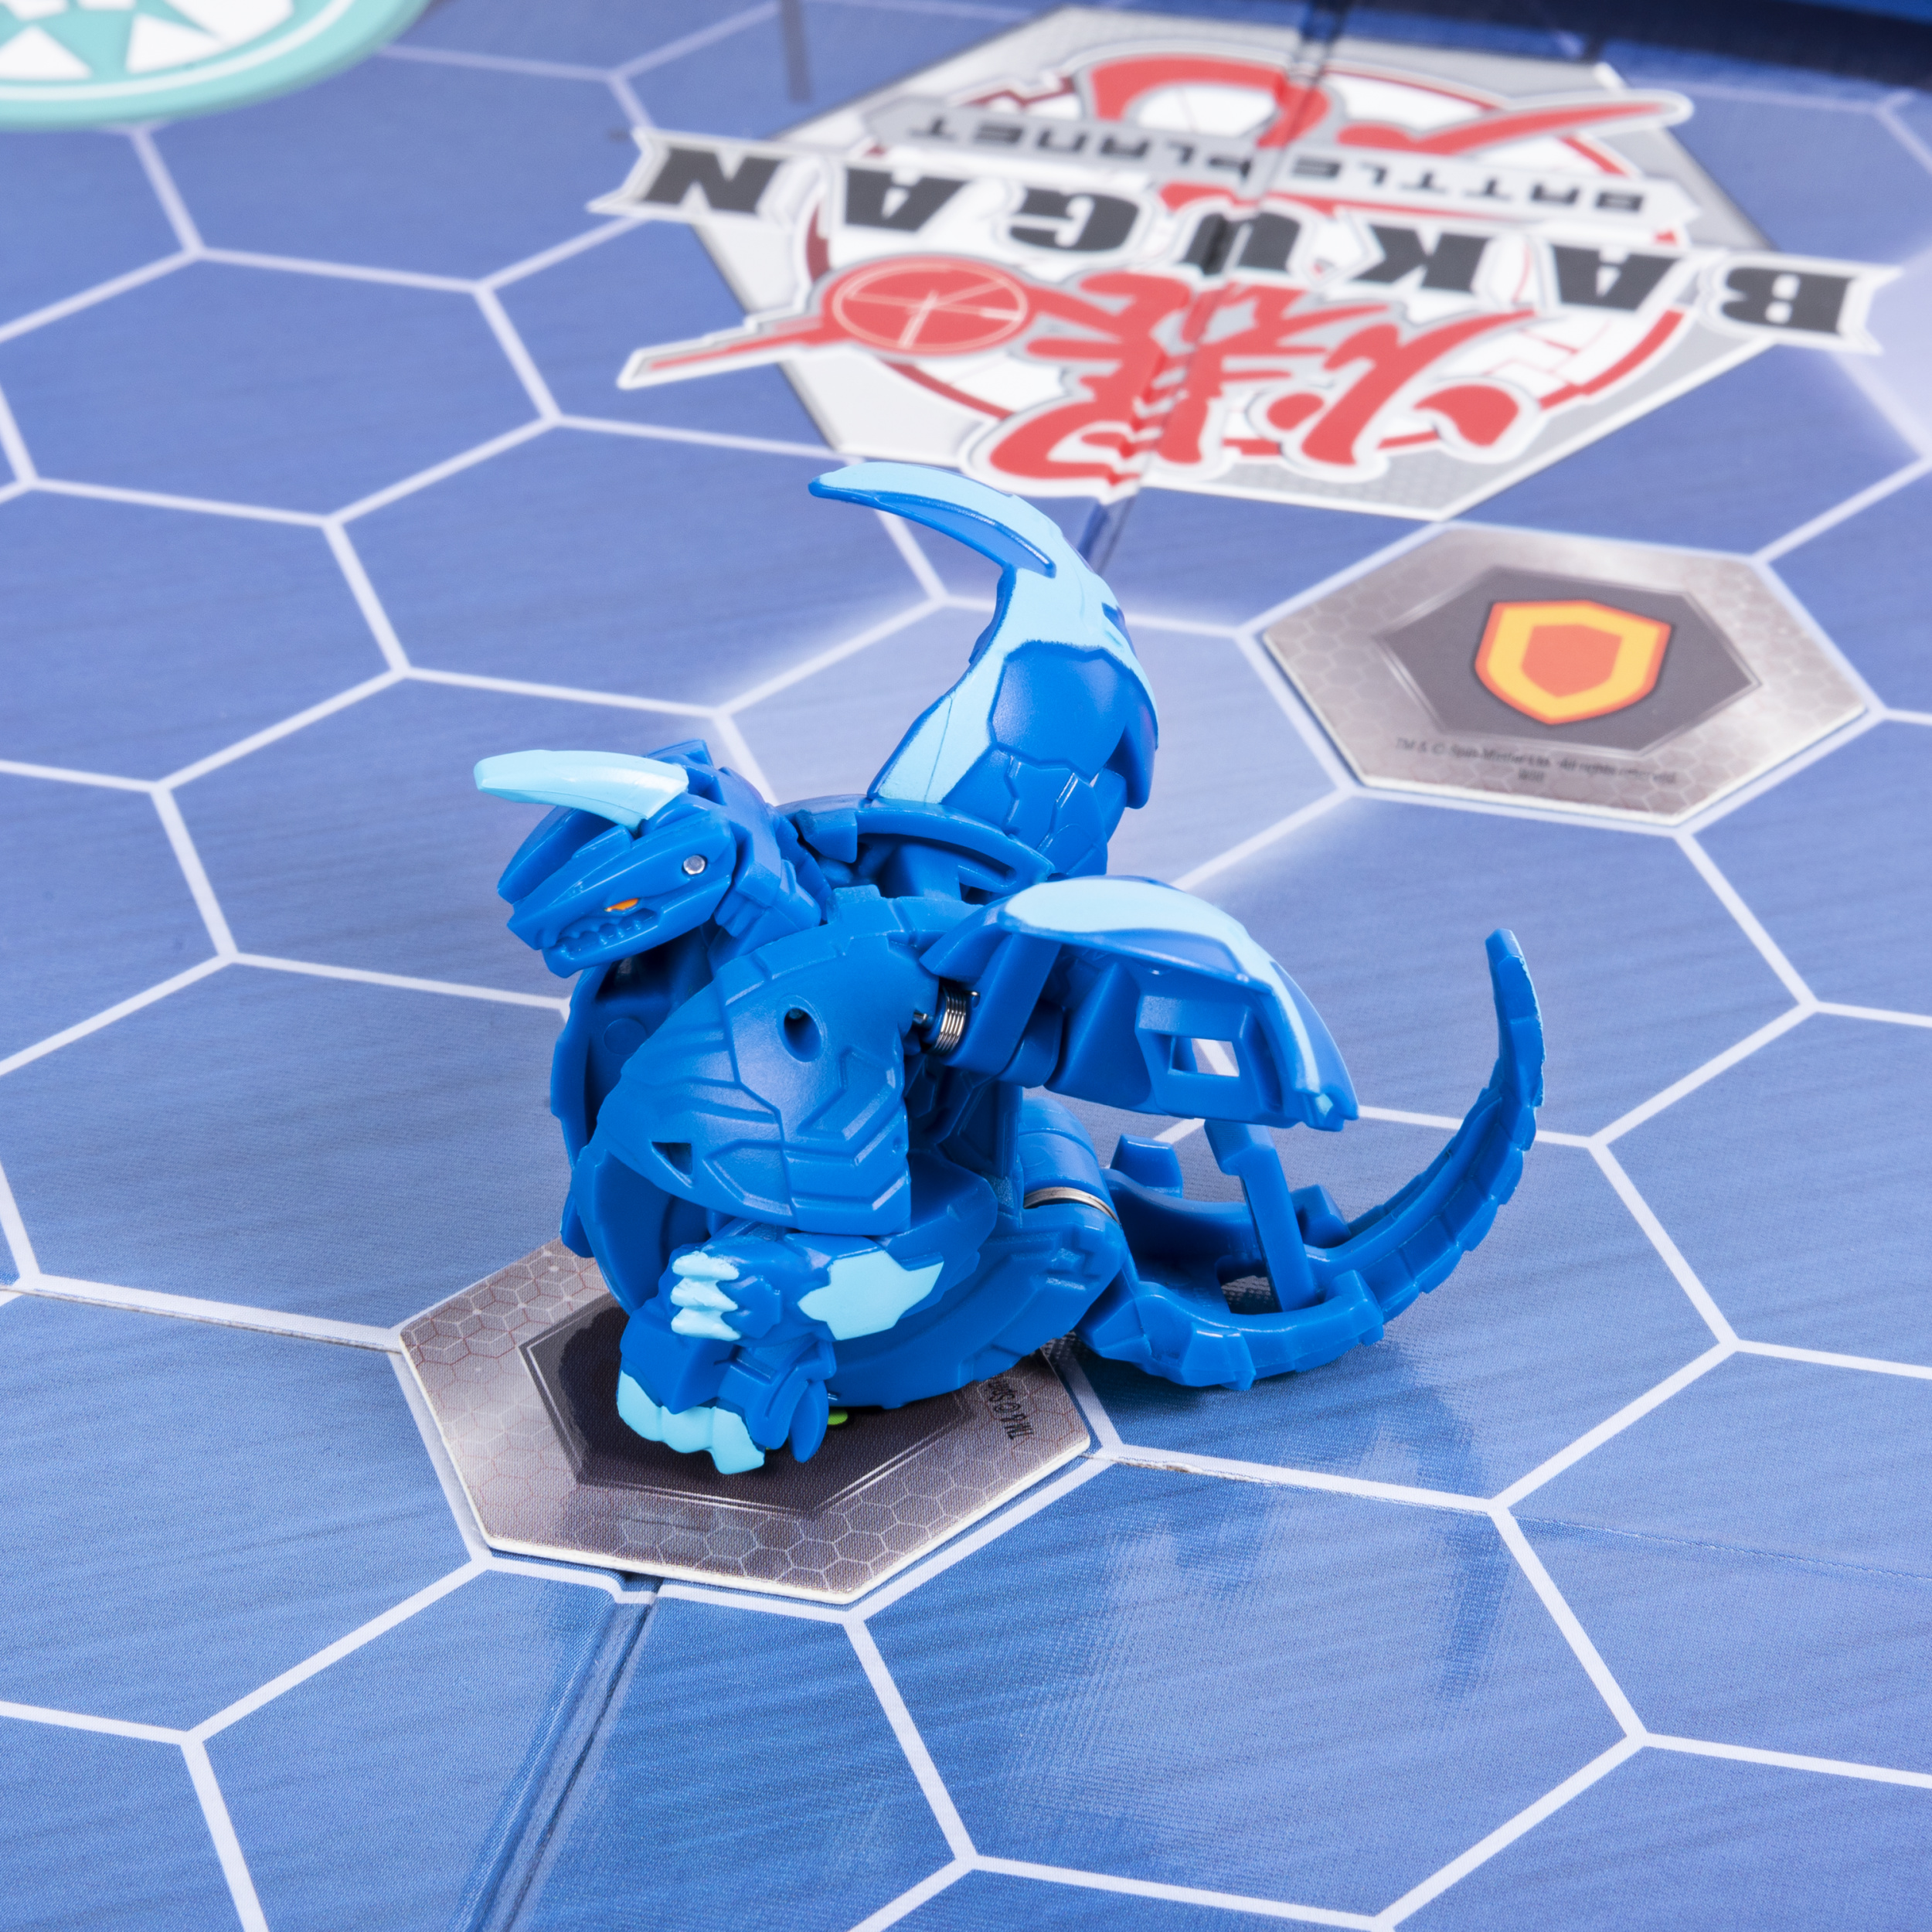 Bakugan Battle Arena, Game Board for Bakugan Collectibles, for Ages 6 and Up (Edition May Vary) - image 4 of 8